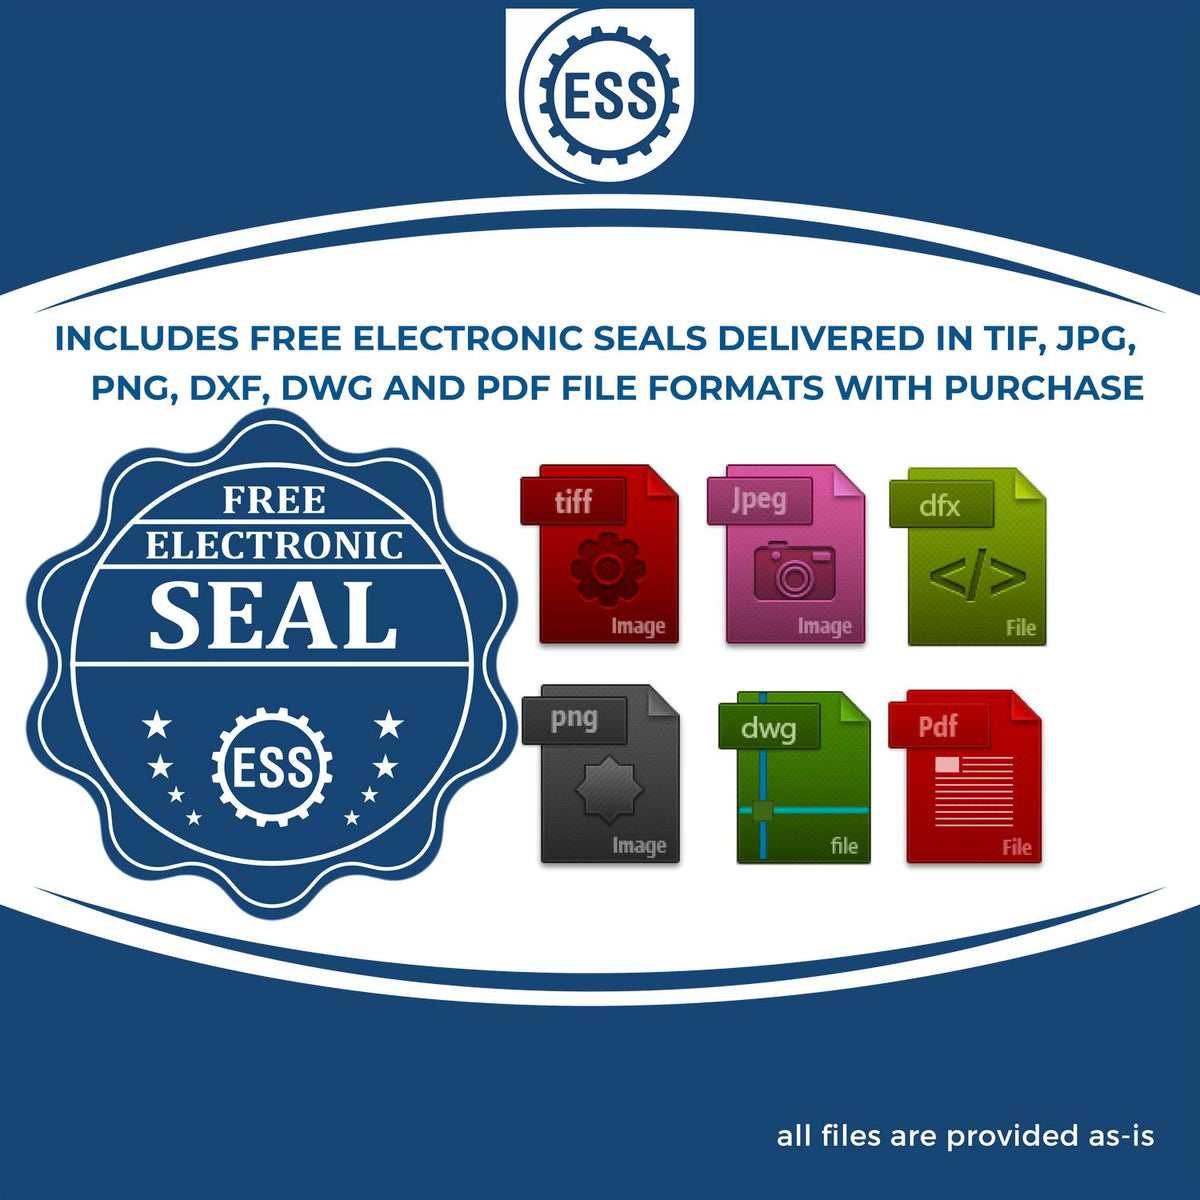 An infographic for the free electronic seal for the Self-Inking Rectangular Pennsylvania Notary Stamp illustrating the different file type icons such as DXF, DWG, TIF, JPG and PNG.